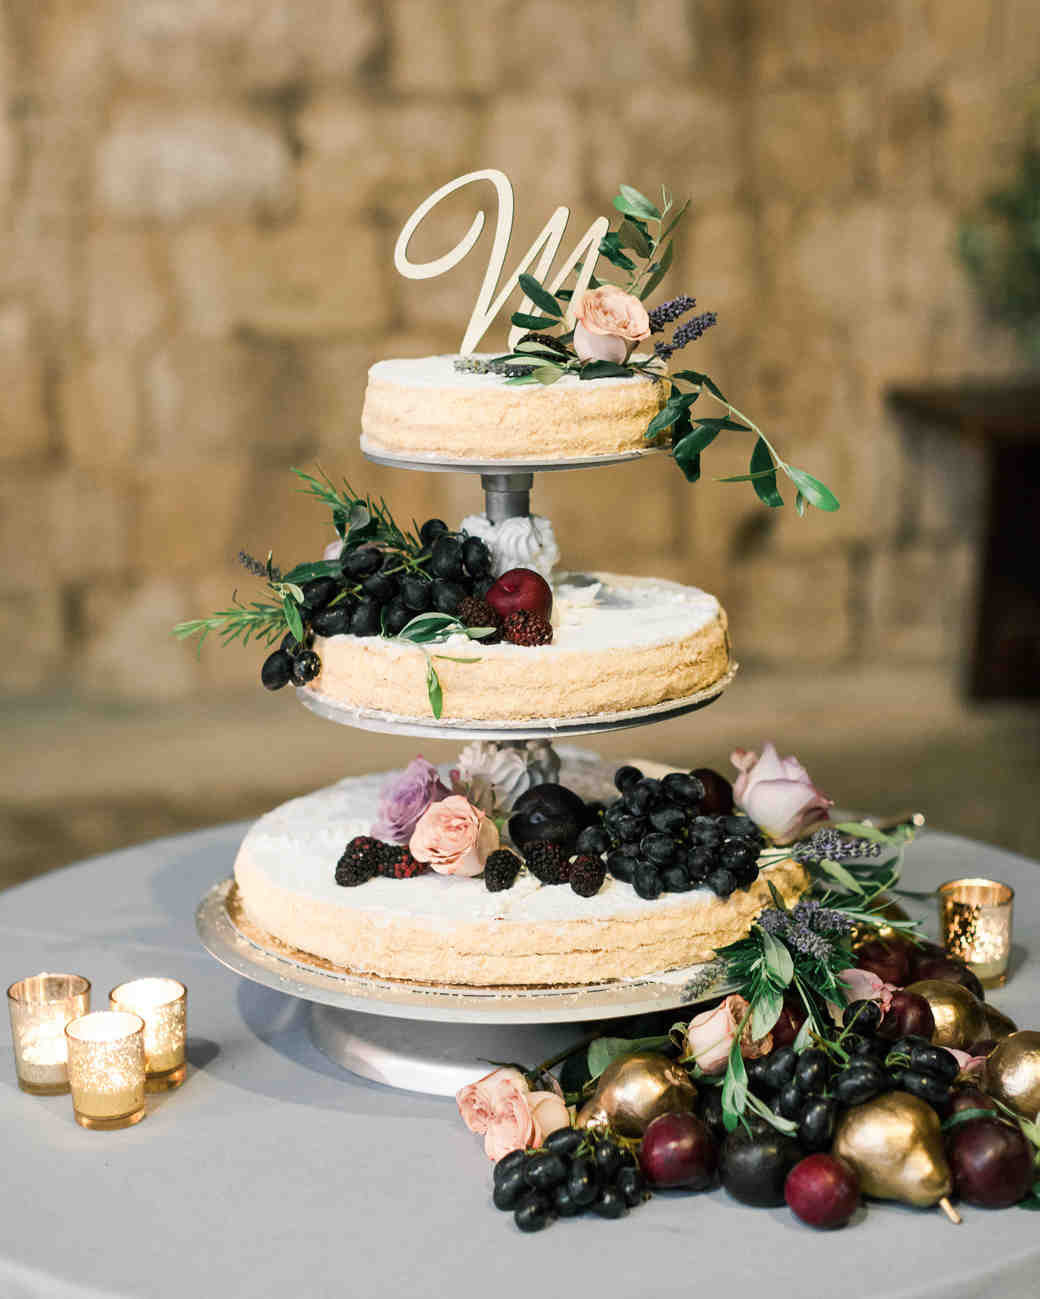 Fruity Wedding Cakes
 42 Fruit Wedding Cakes That Are Full of Color and Flavor